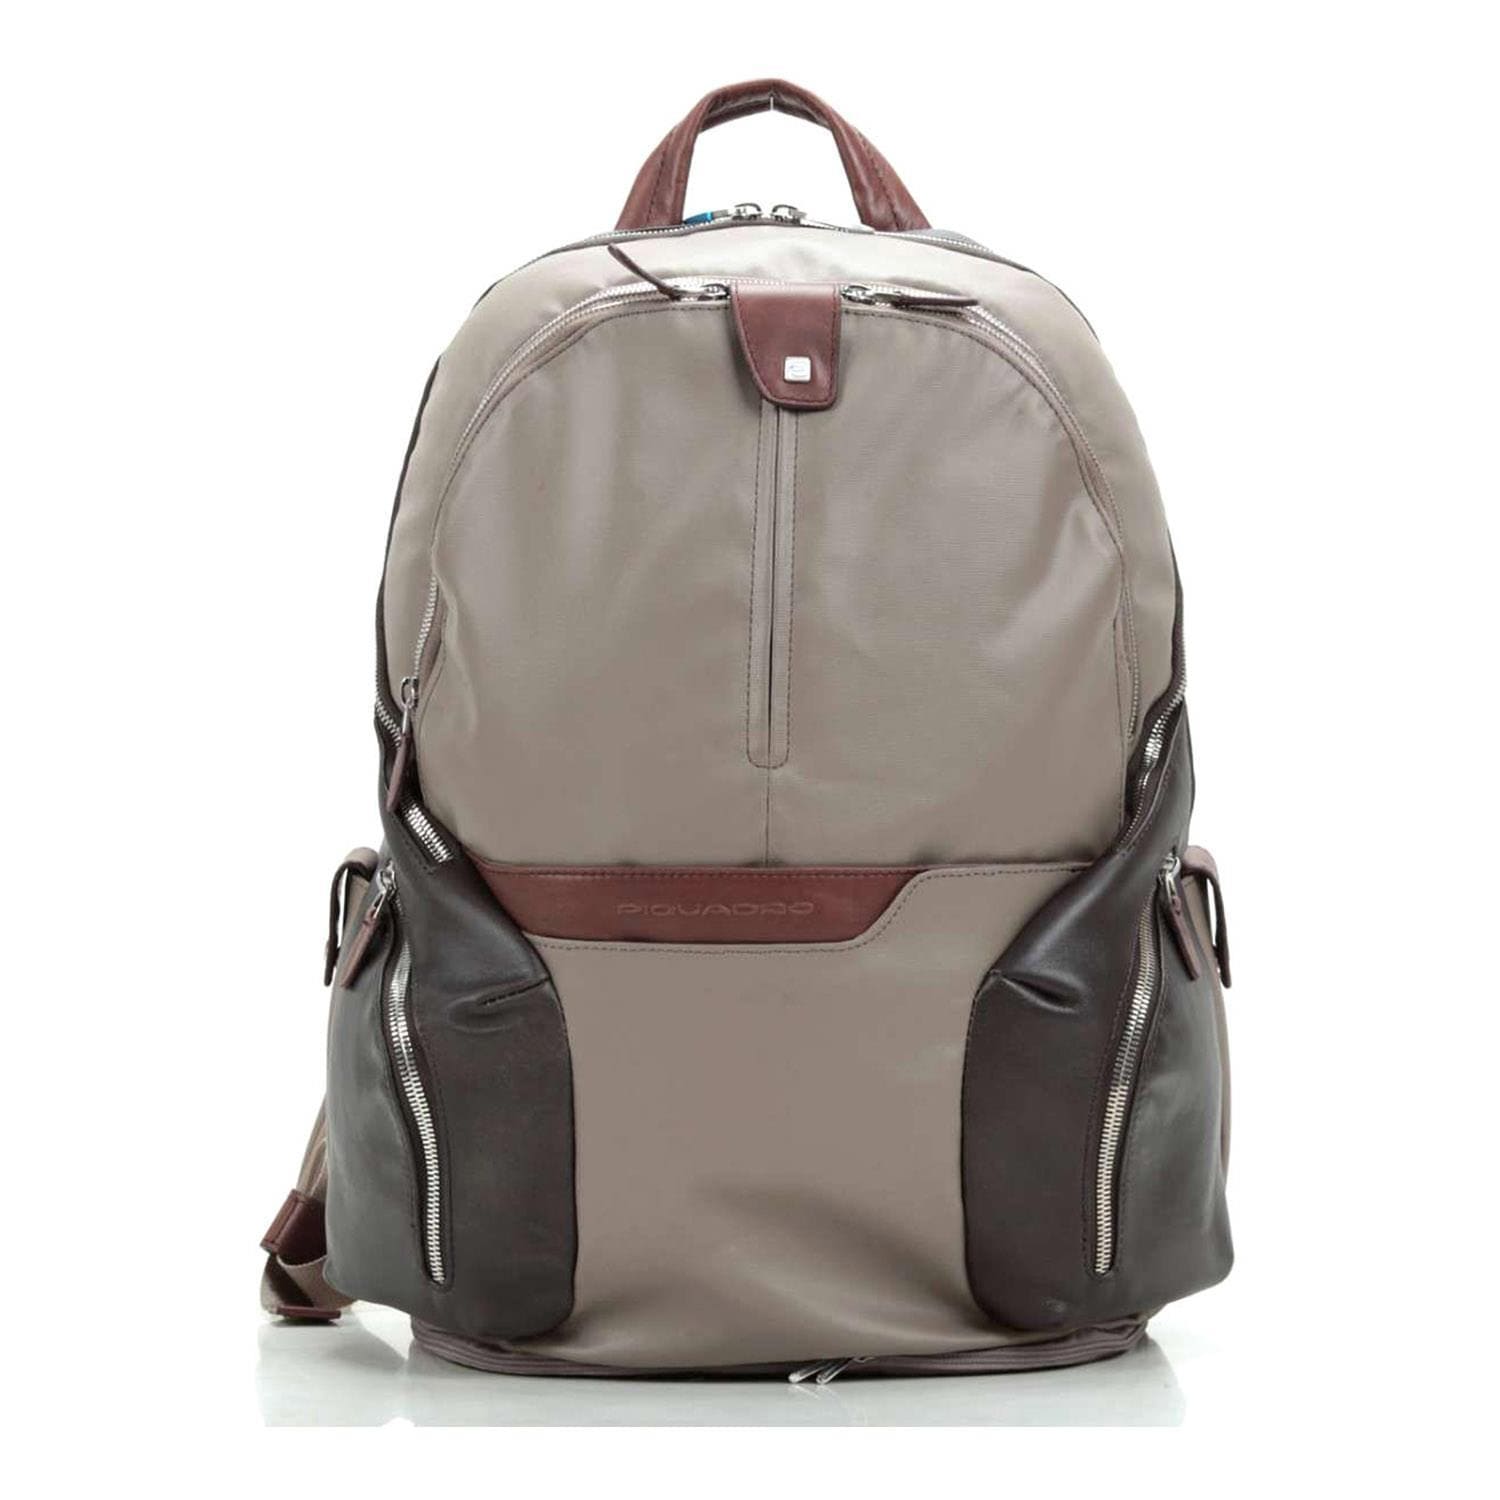 Piquadro Ipad Compartment Backpack - Taupe - CA2943OS/TO - Jashanmal Home